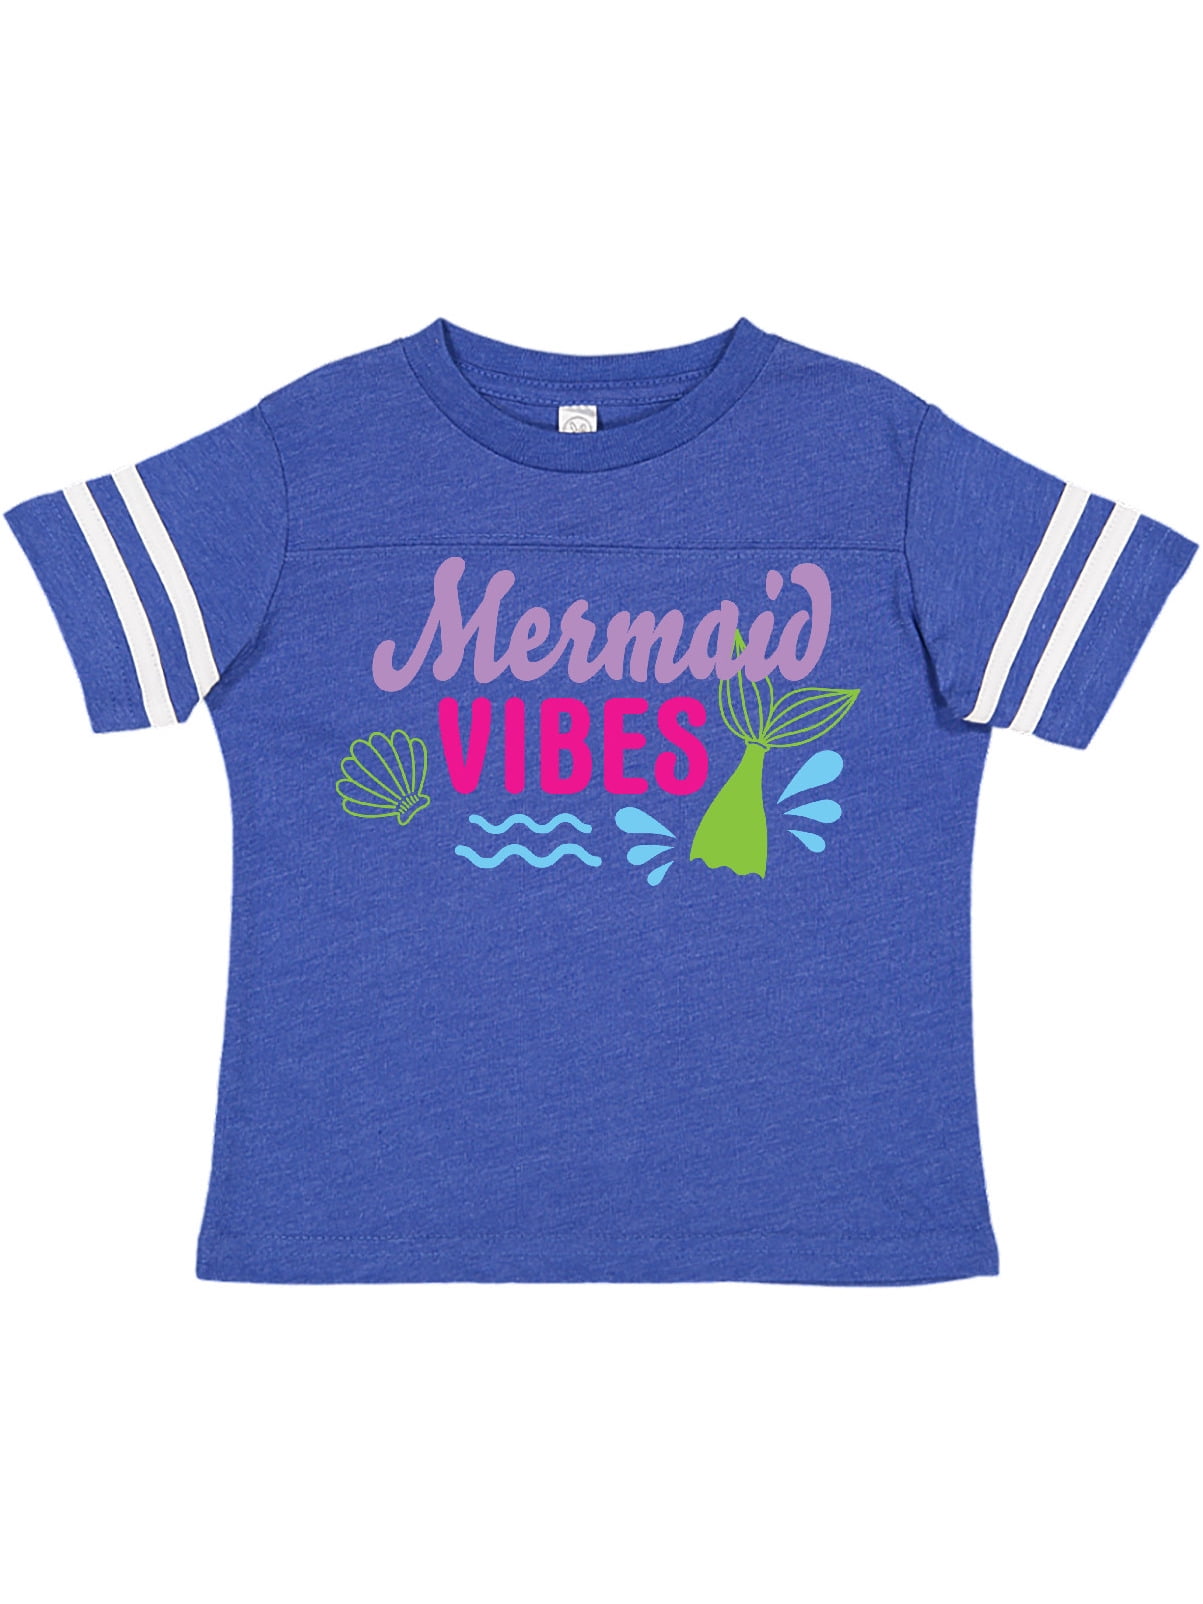 inktastic Mermaid Vibes with Tail and Seashell Toddler T-Shirt